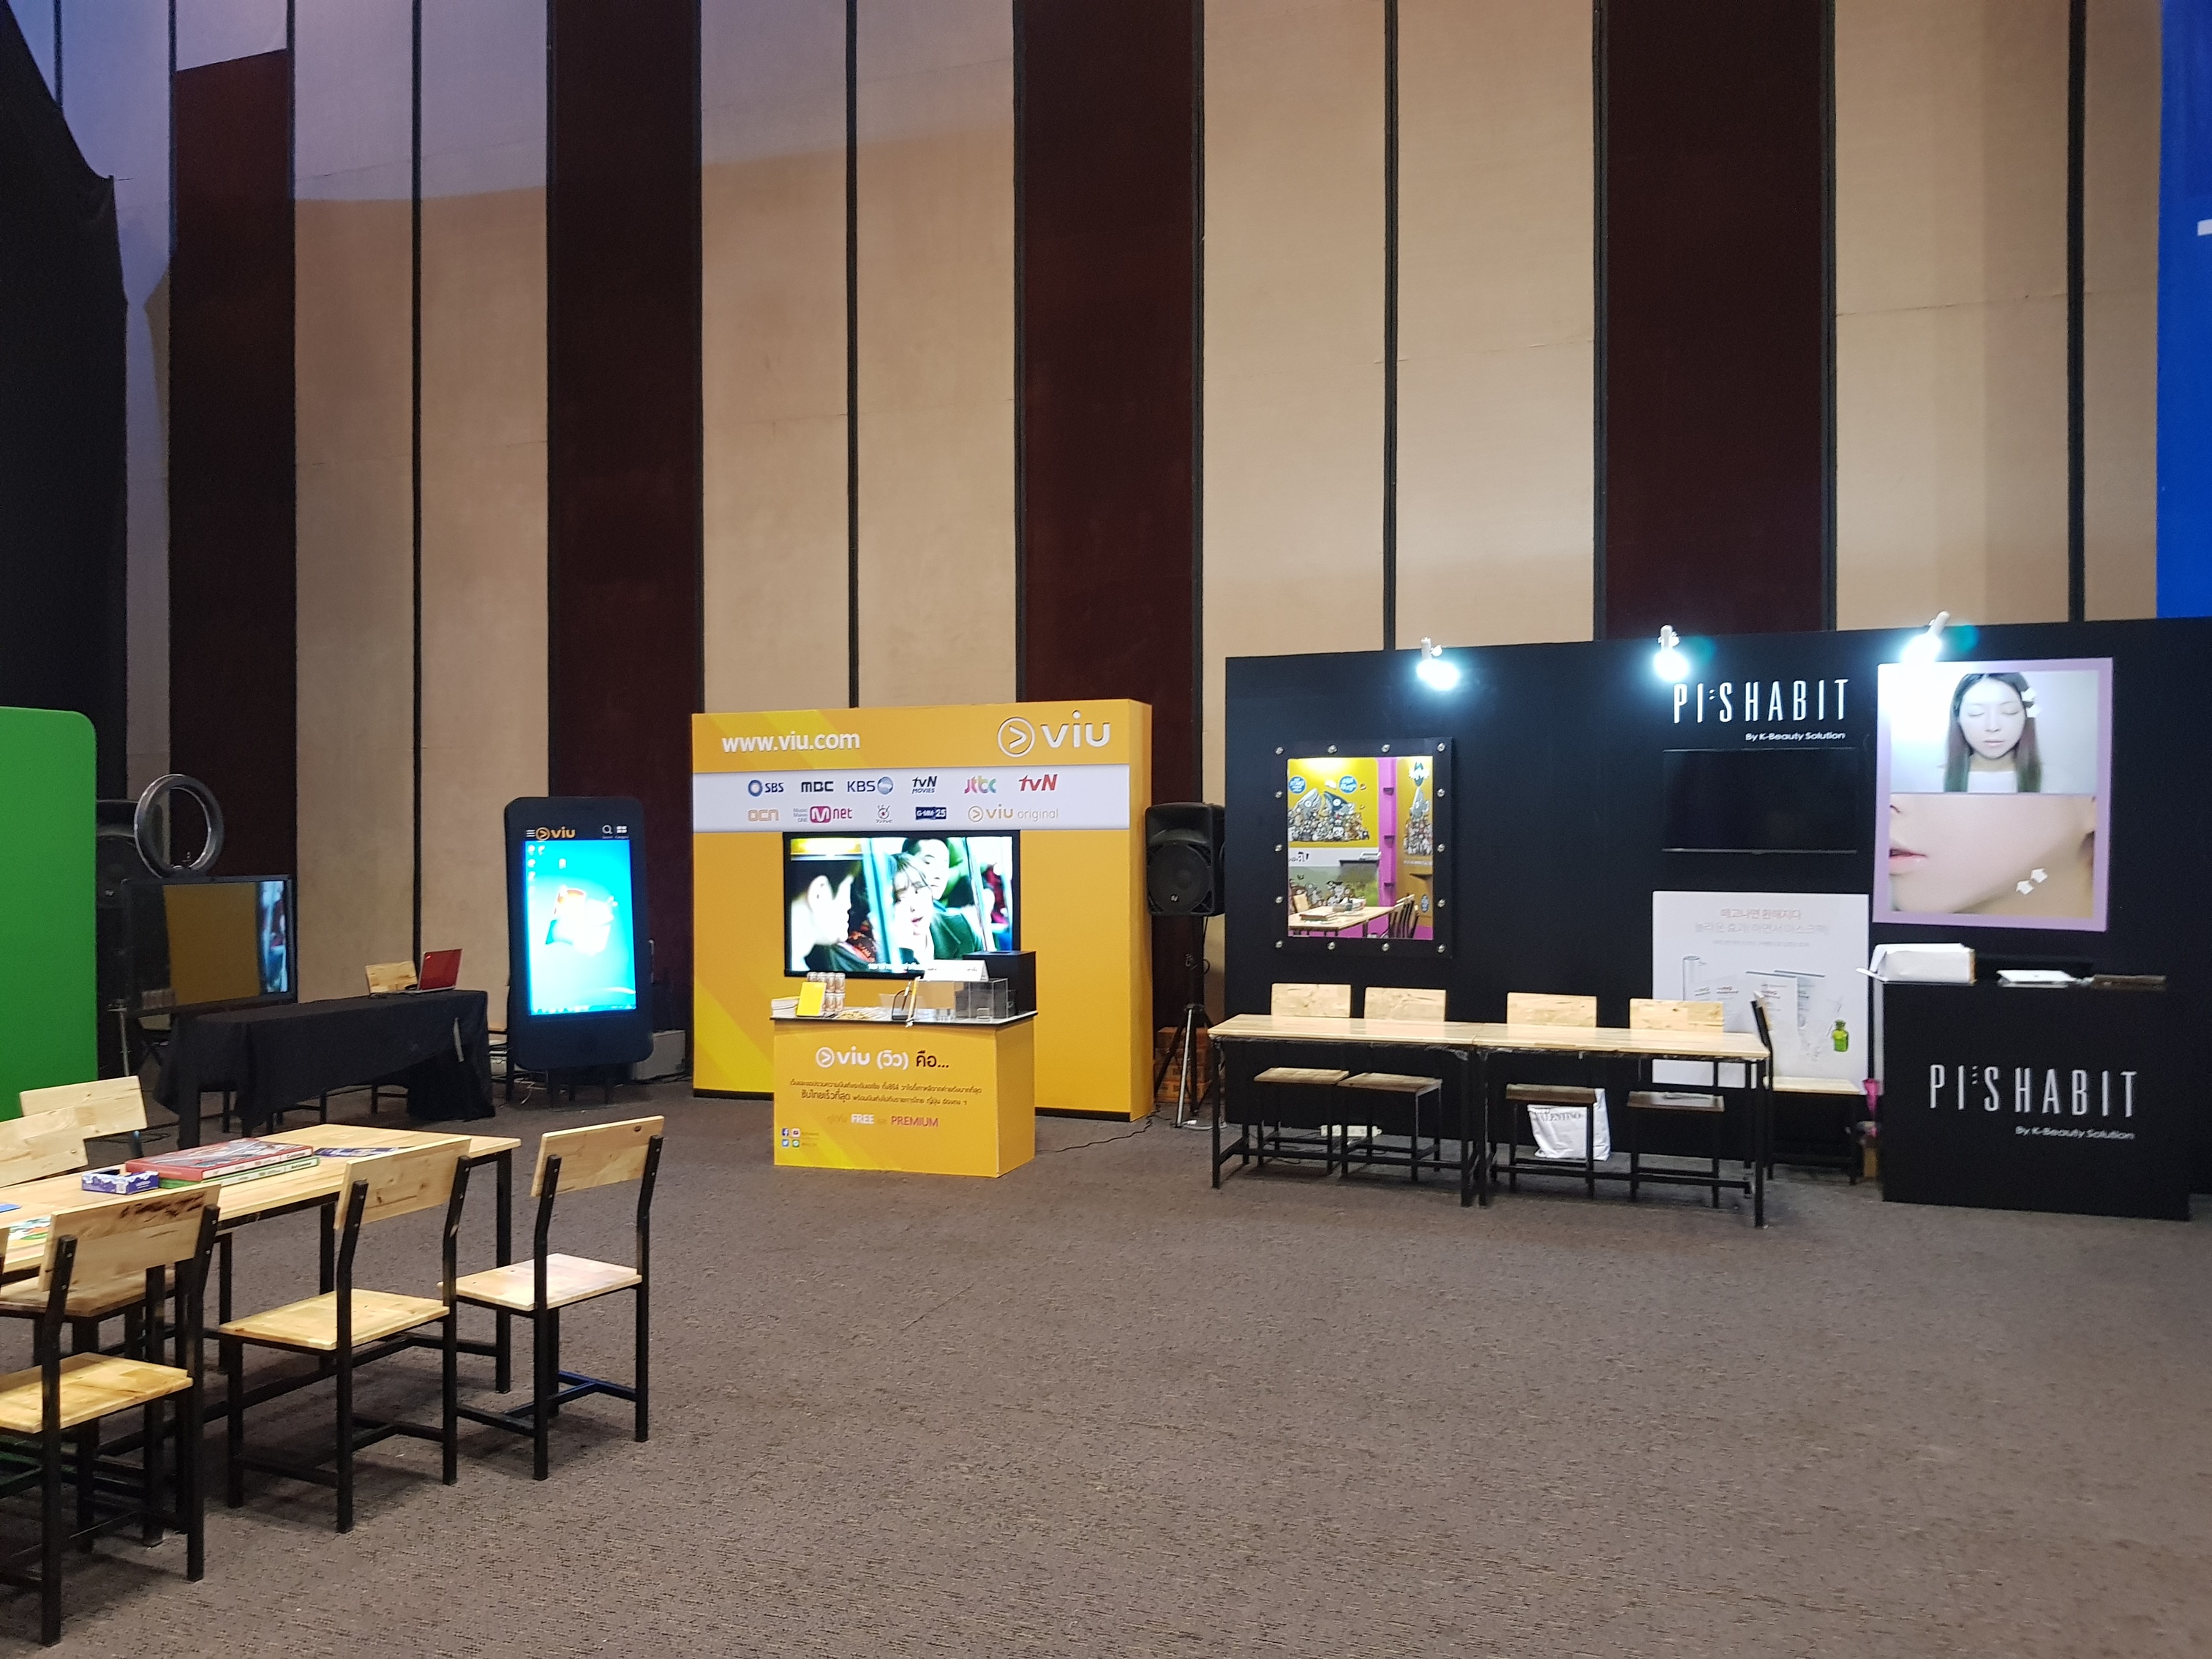 K-Contents EXPO Thailand 2018